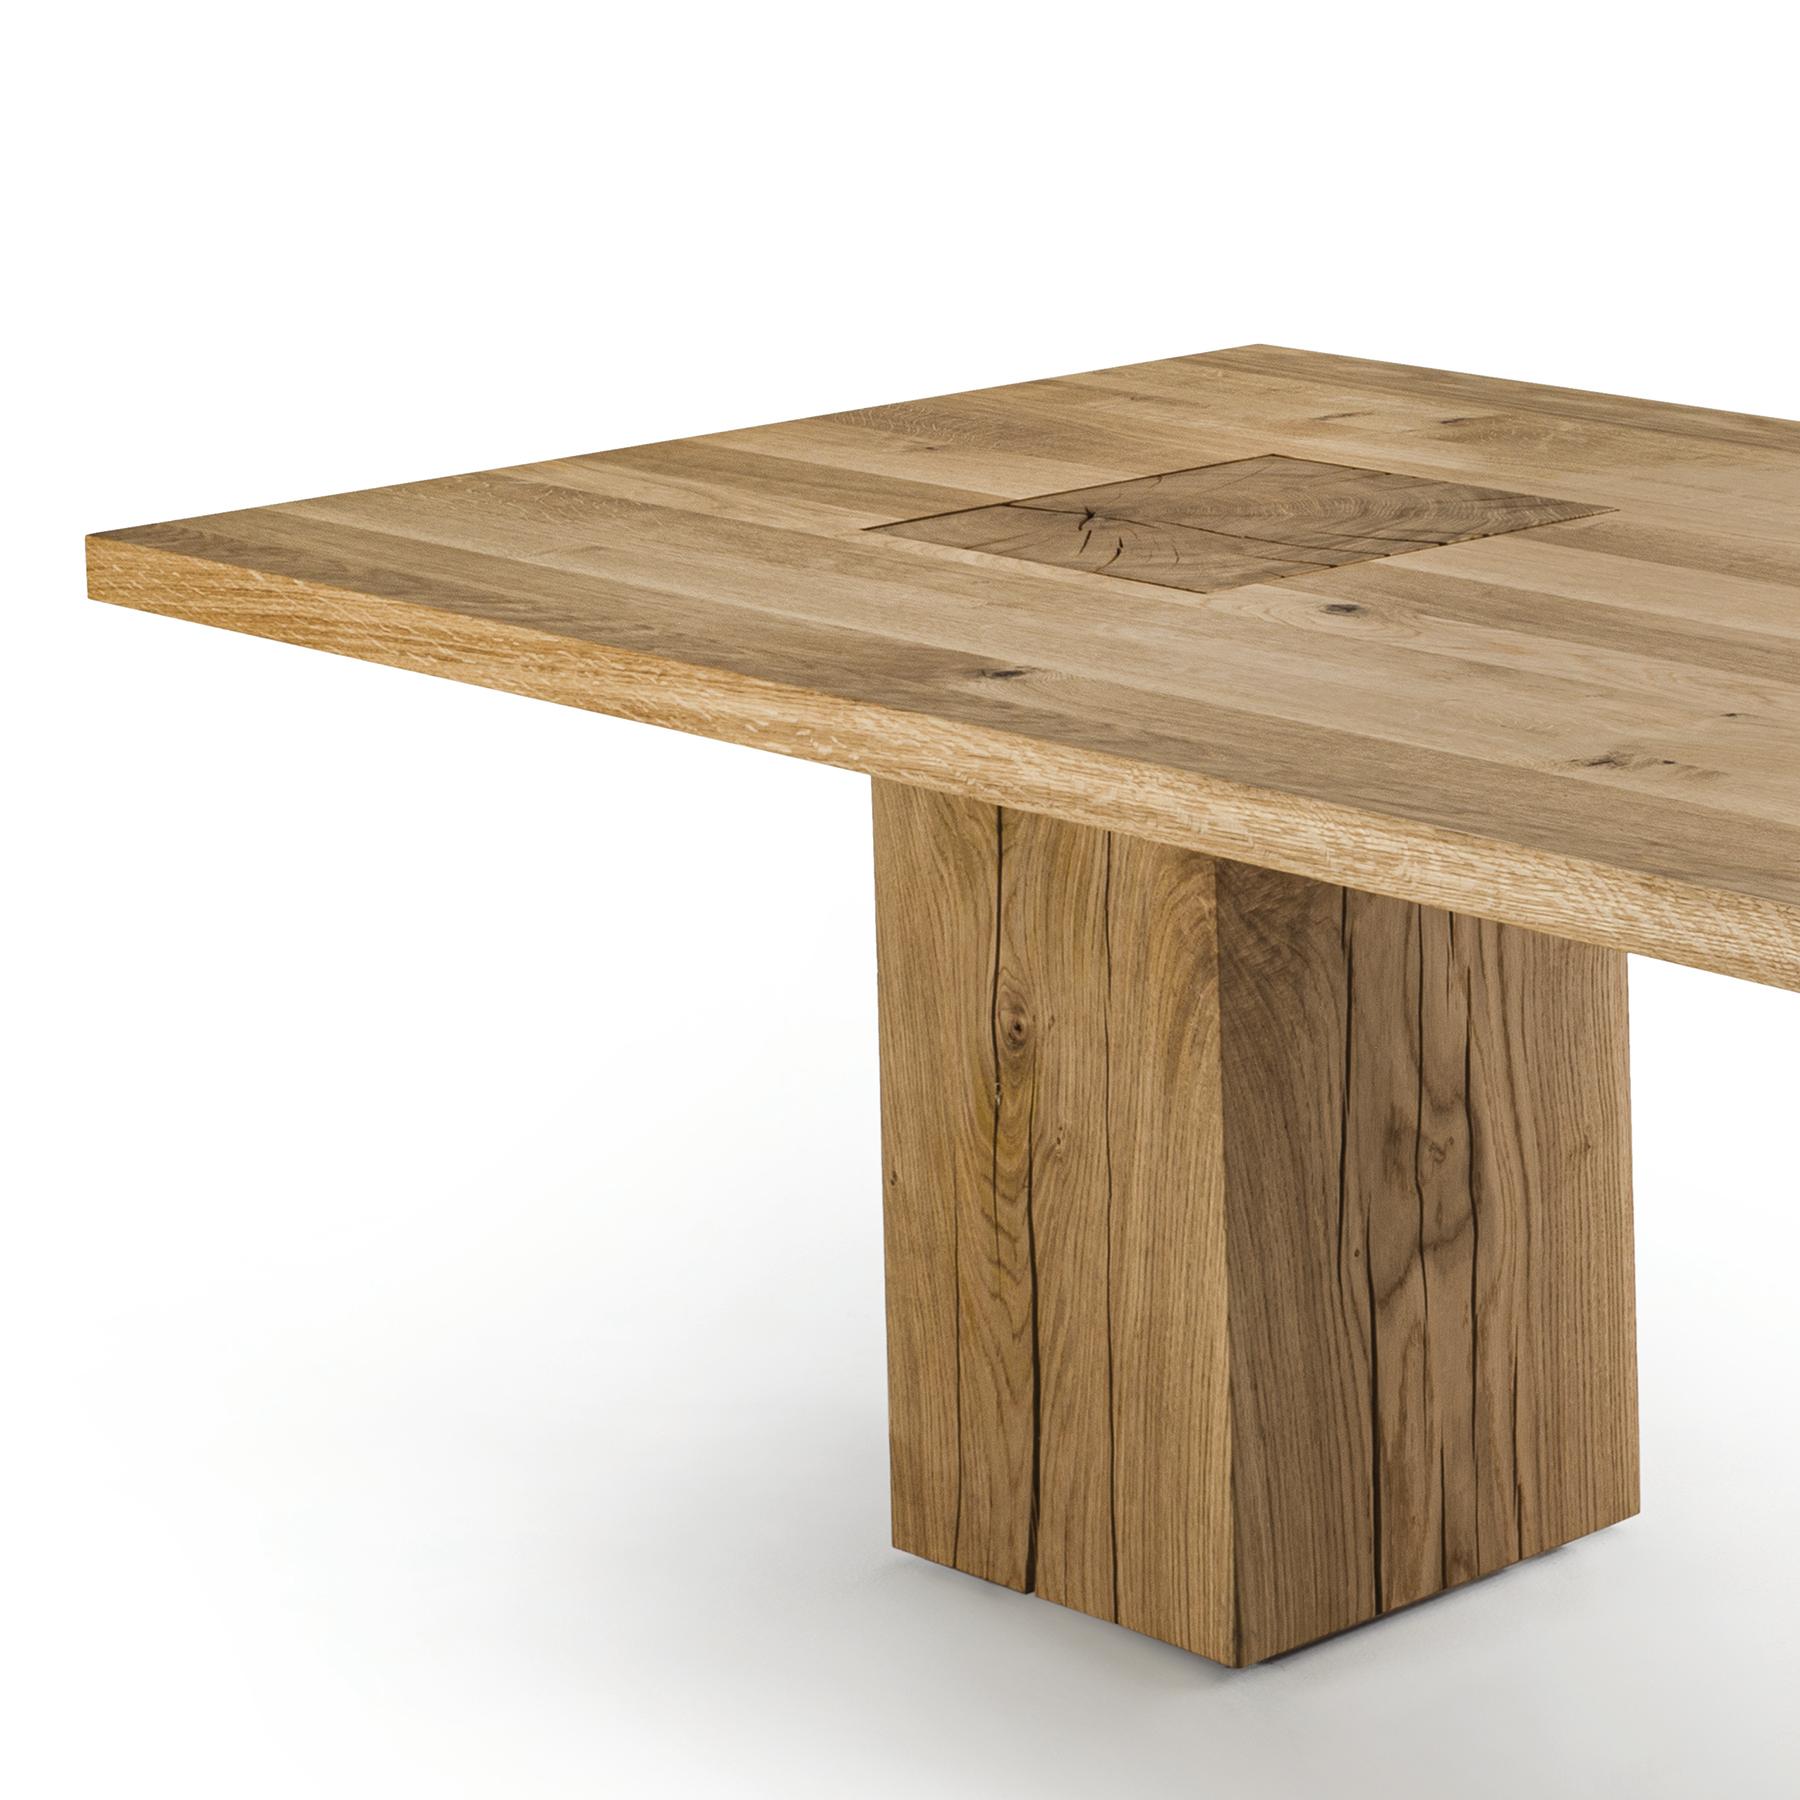 Dining table full wood oak with all structure in solid oak 
wood with knots, the 2 bases are passing through the top. 
Also available in solid walnut wood with knots, on request,
including up-charge.
Available in: 
L 240 x D 100 x H 73.5cm, price: